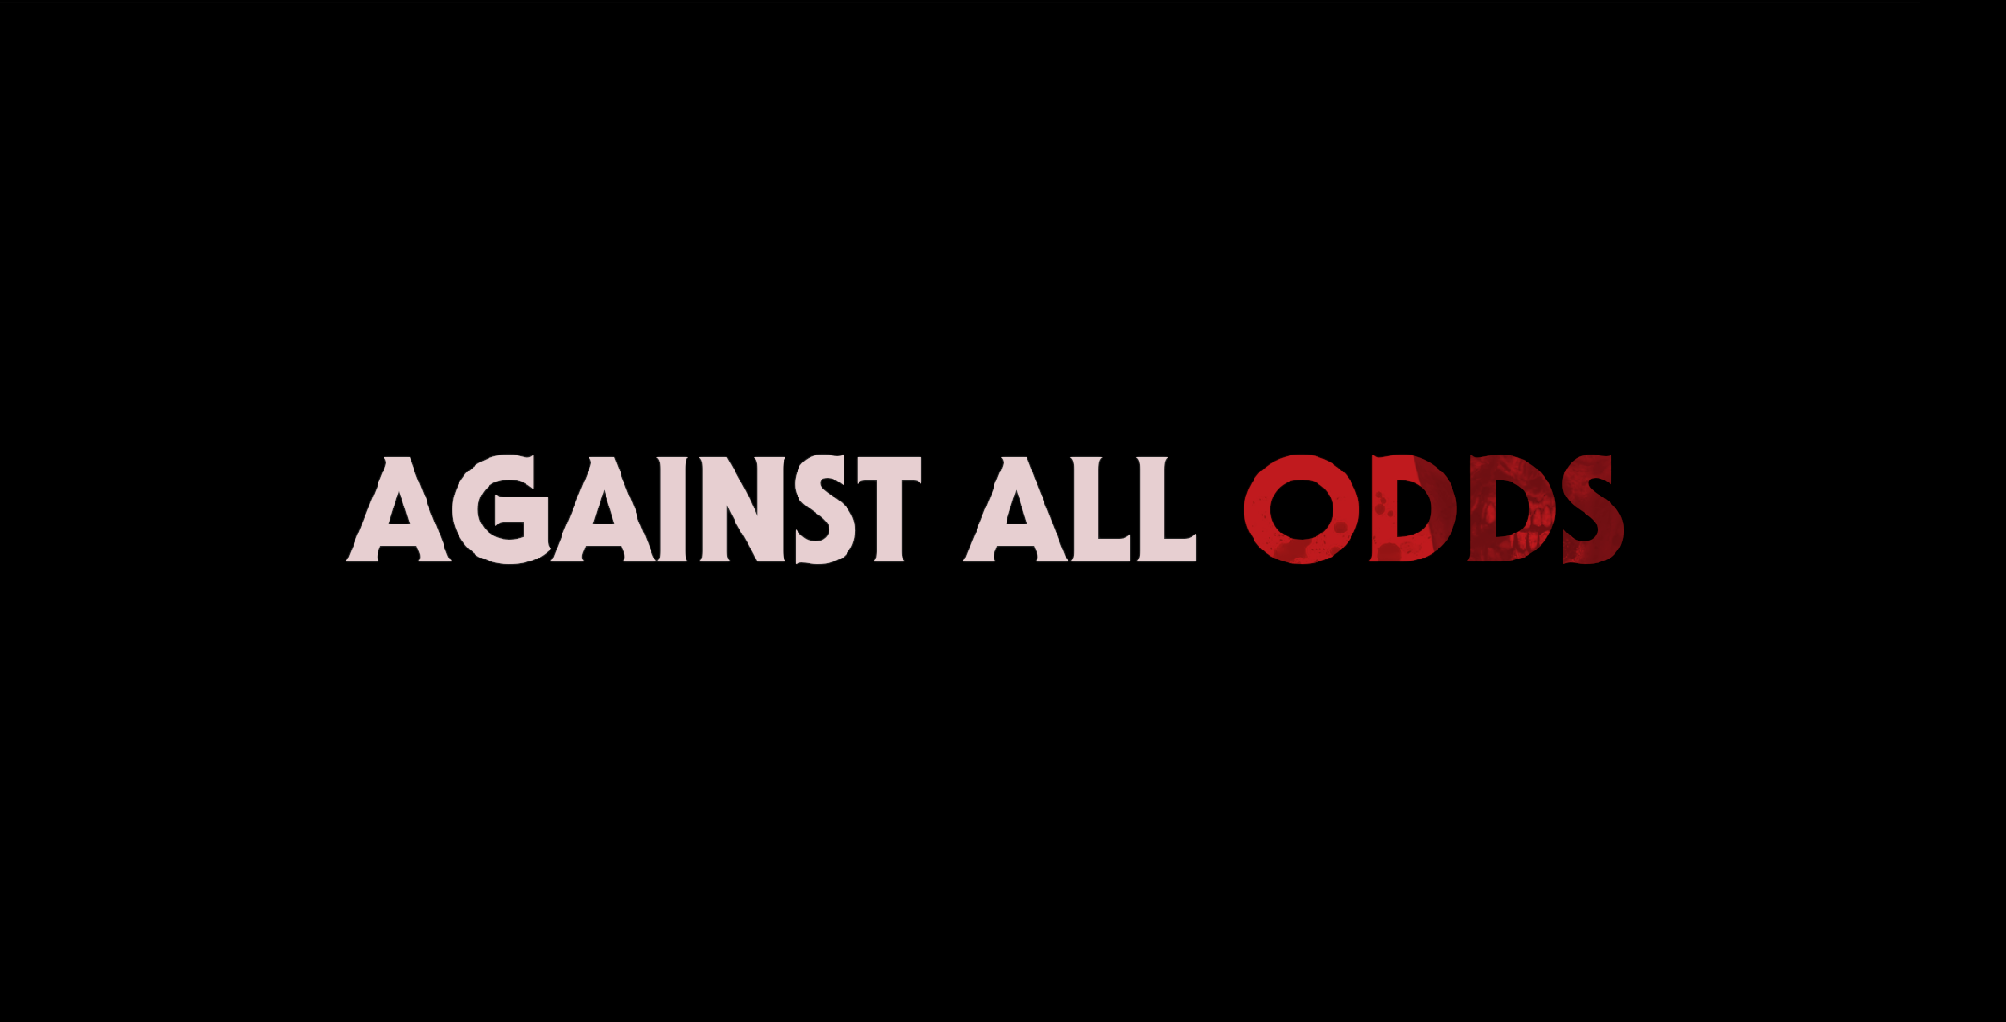 Against All Odds Windows, Mac, Linux game IndieDB